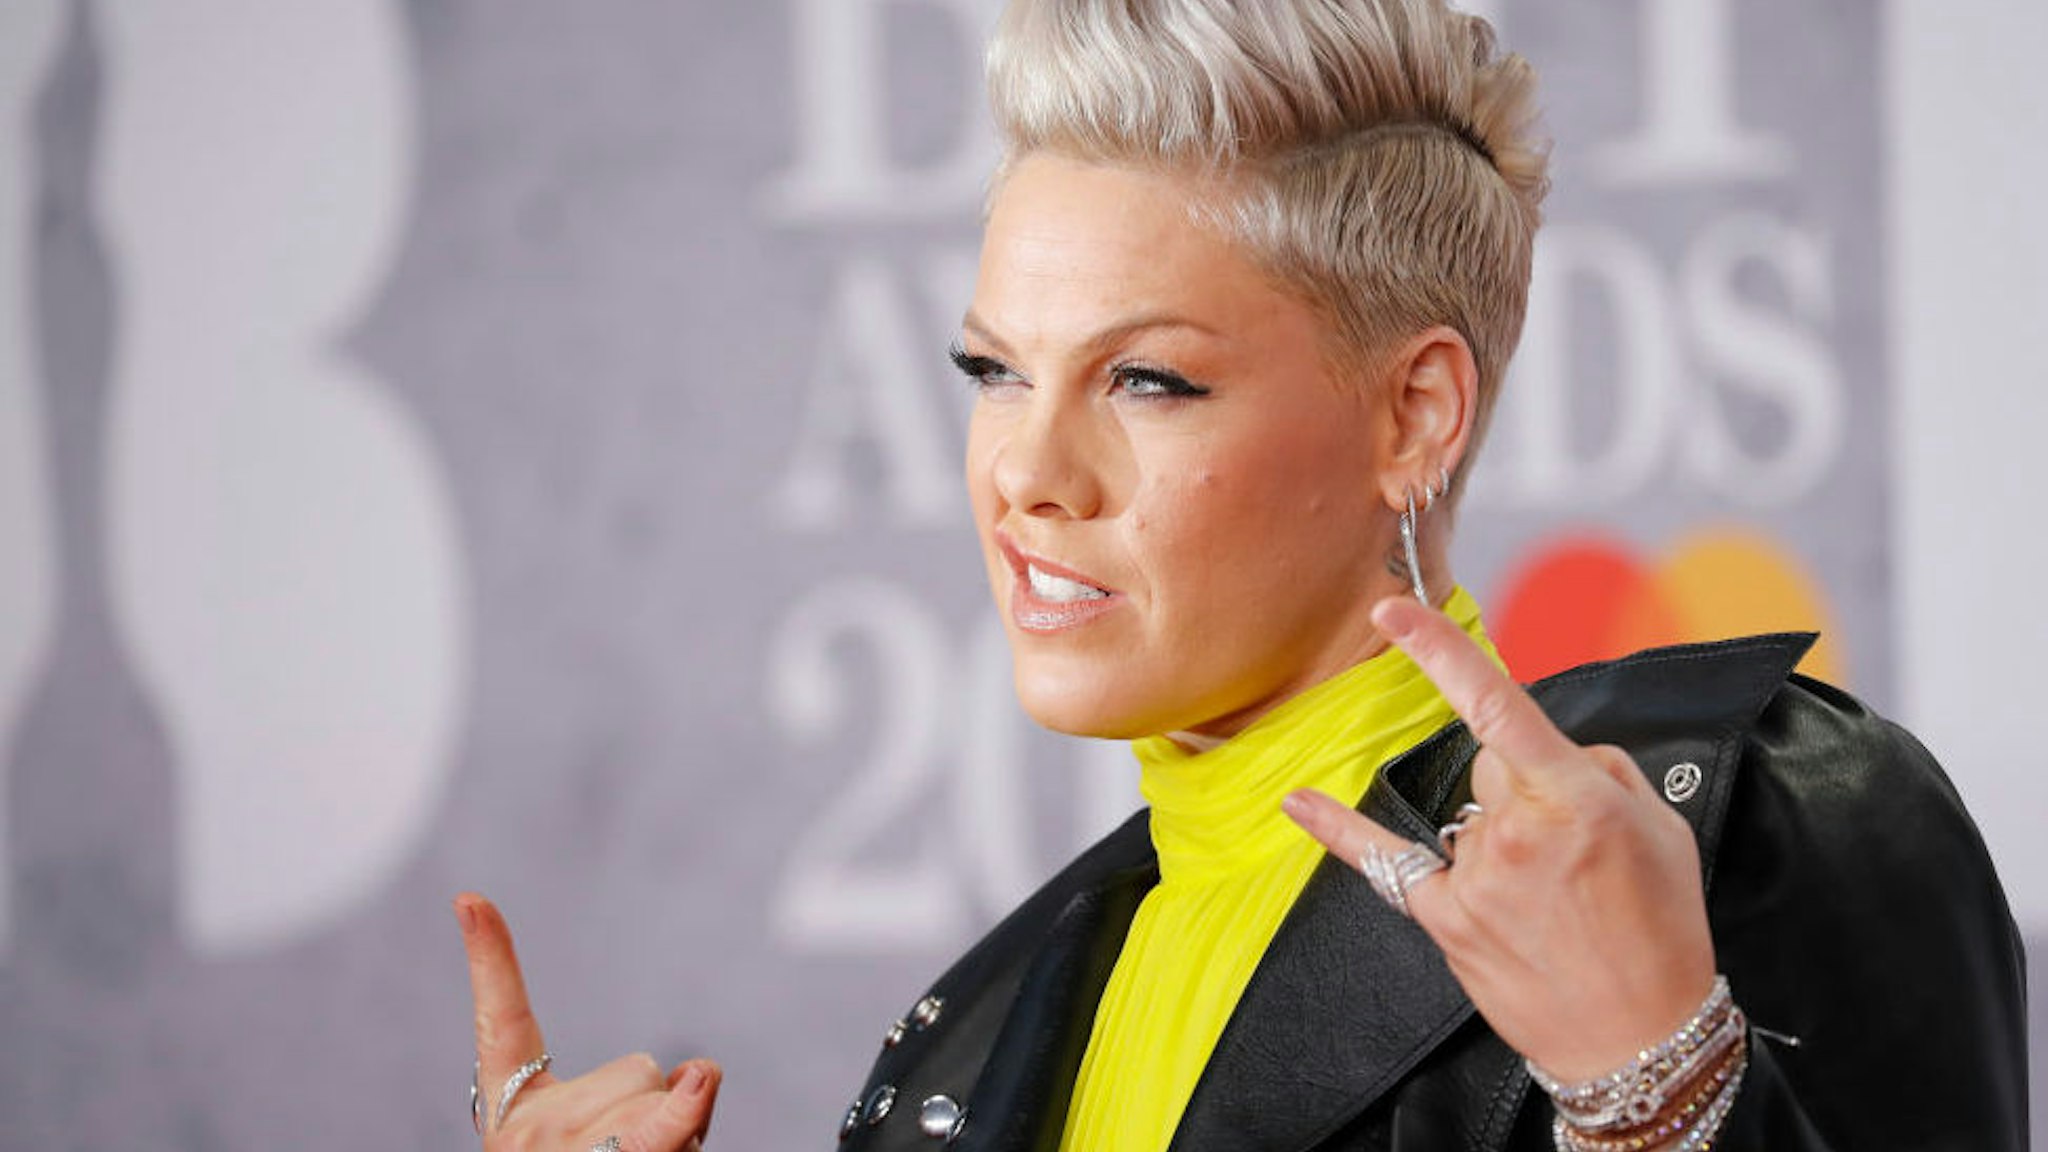 US singer-songwriter Pink poses on the red carpet on arrival for the BRIT Awards 2019 in London on February 20, 2019.